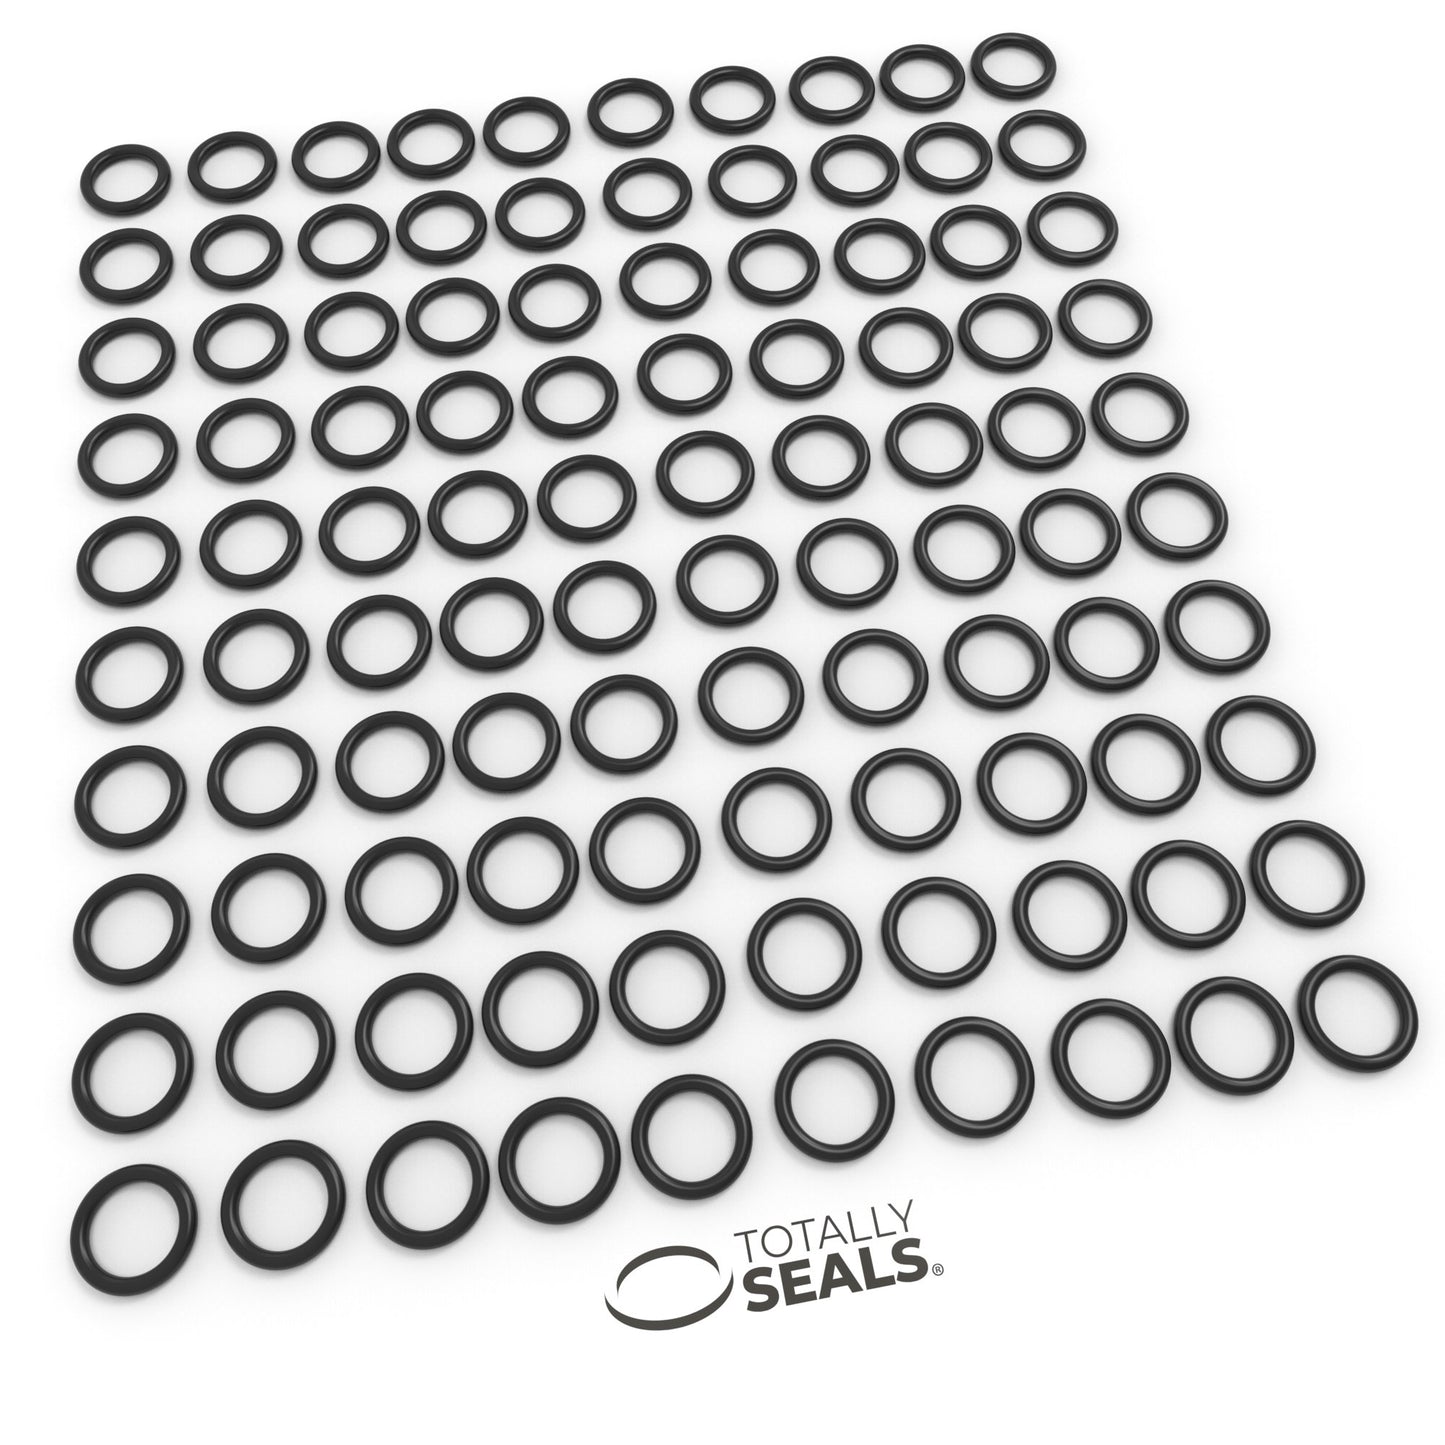 24mm x 2.5mm (29mm OD) Nitrile O-Rings - Totally Seals®